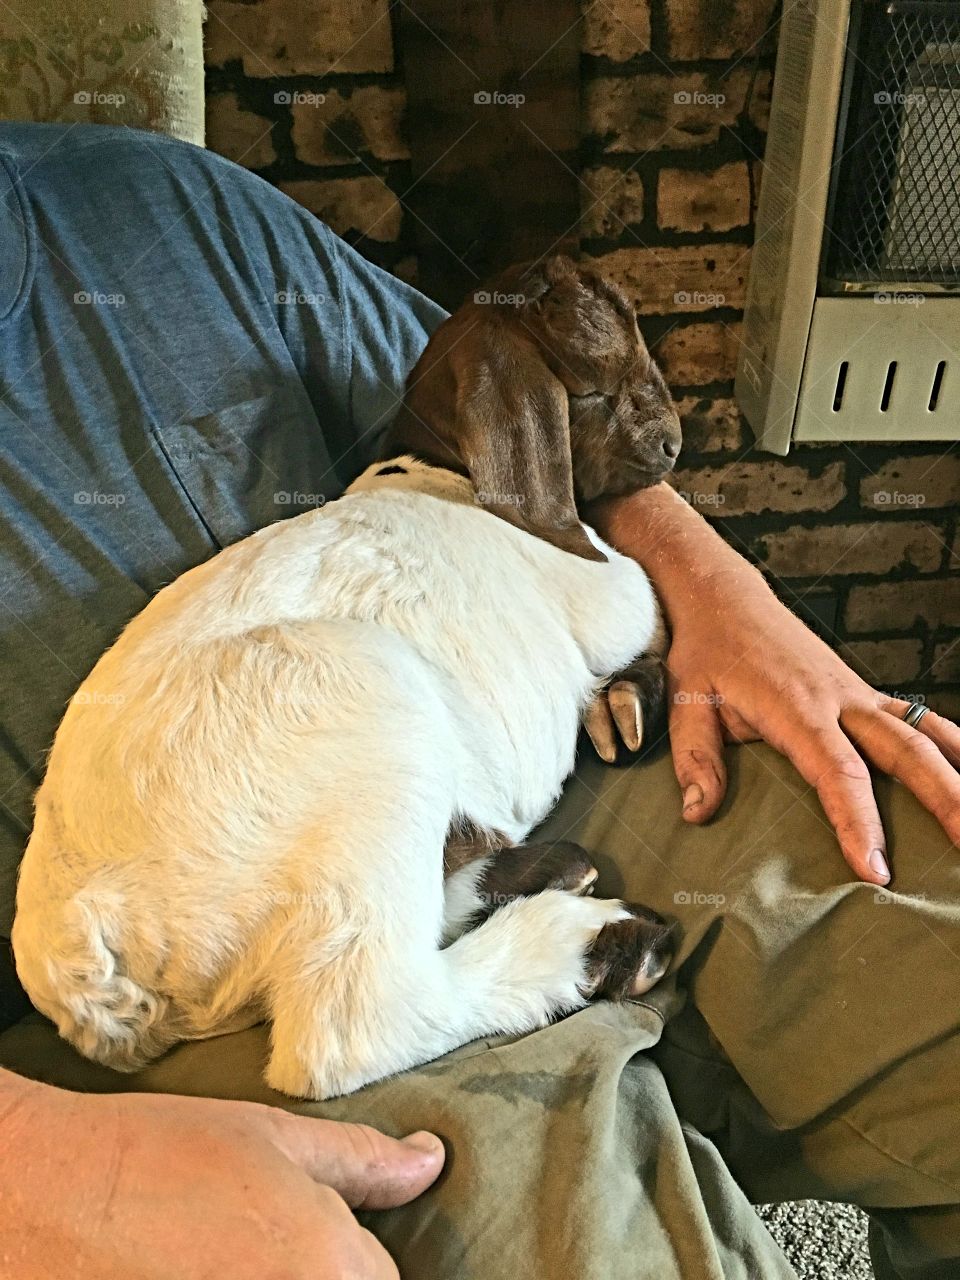 Lap goat. Baby got sitting in my brother's lap napping.